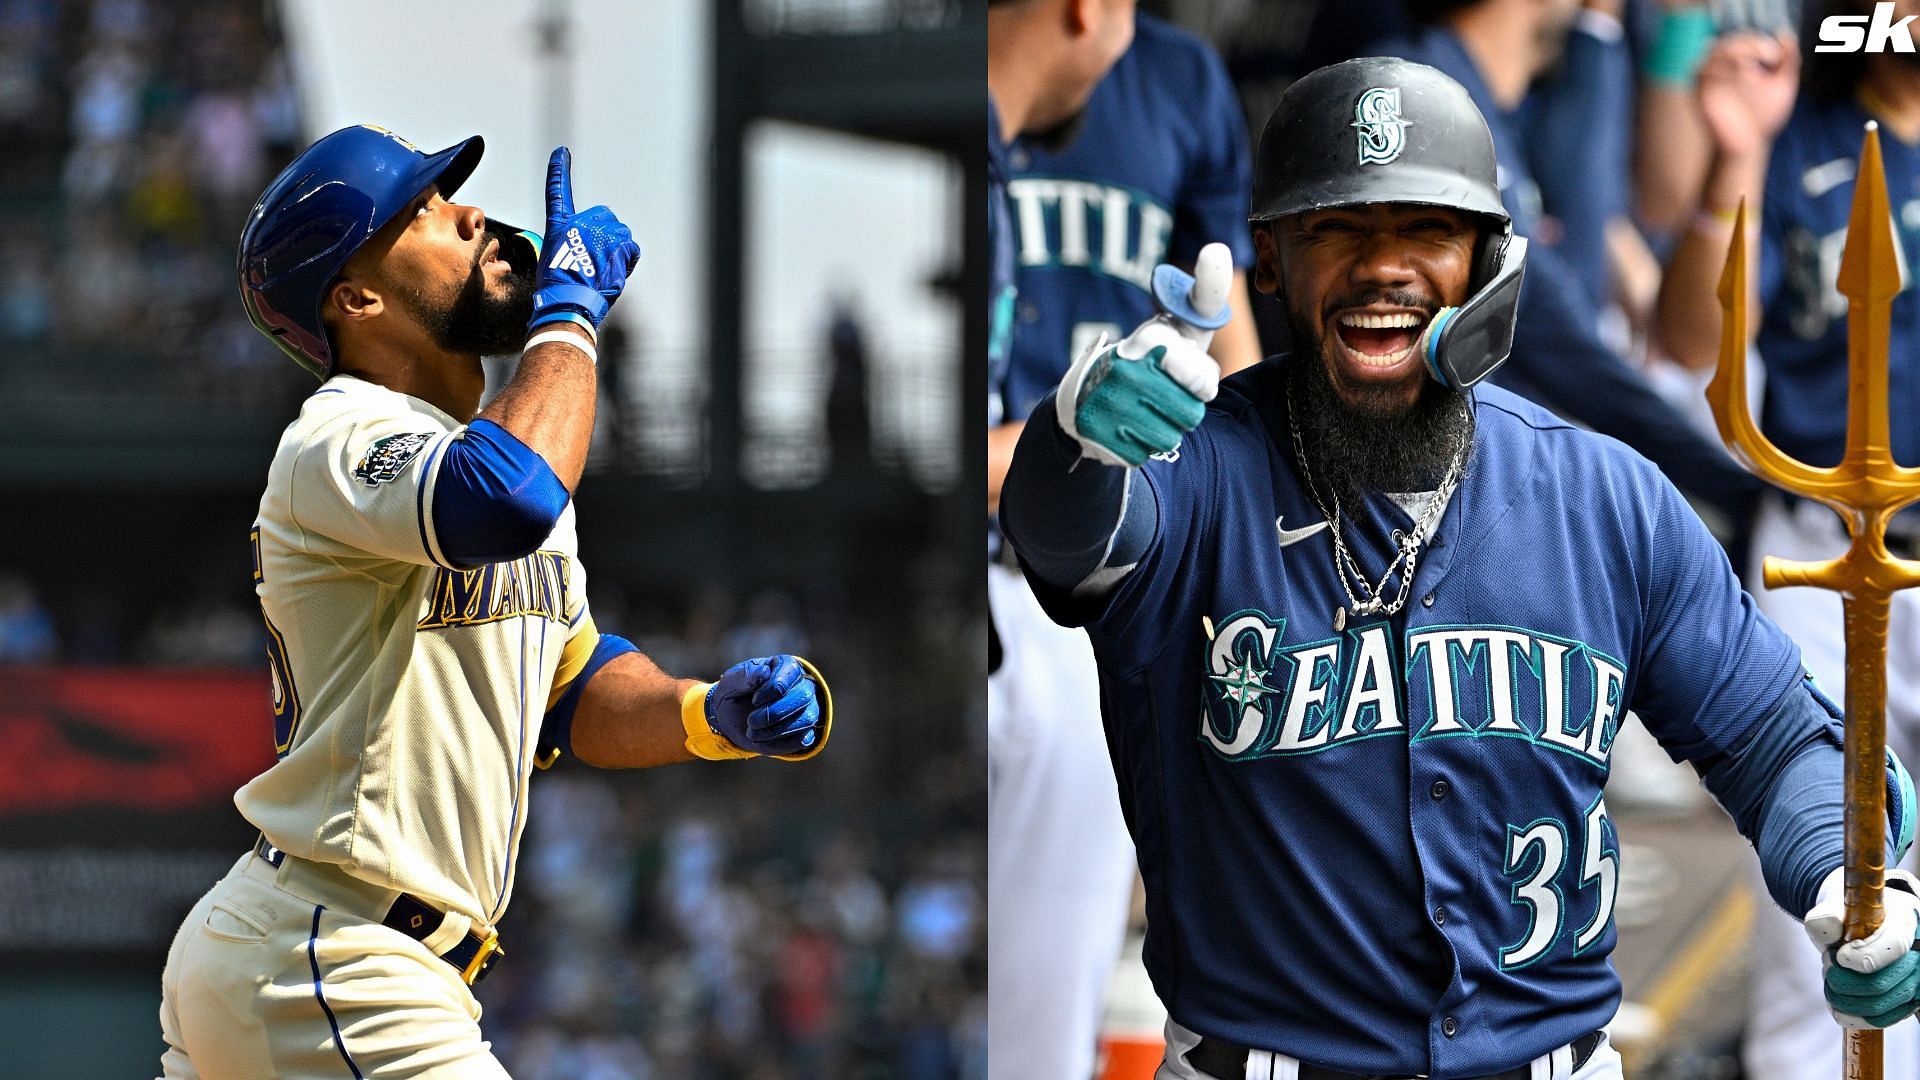 Teoscar Hernandez of the Seattle Mariners celebrates with teammates after hitting a three-run home run against the Oakland Athletics